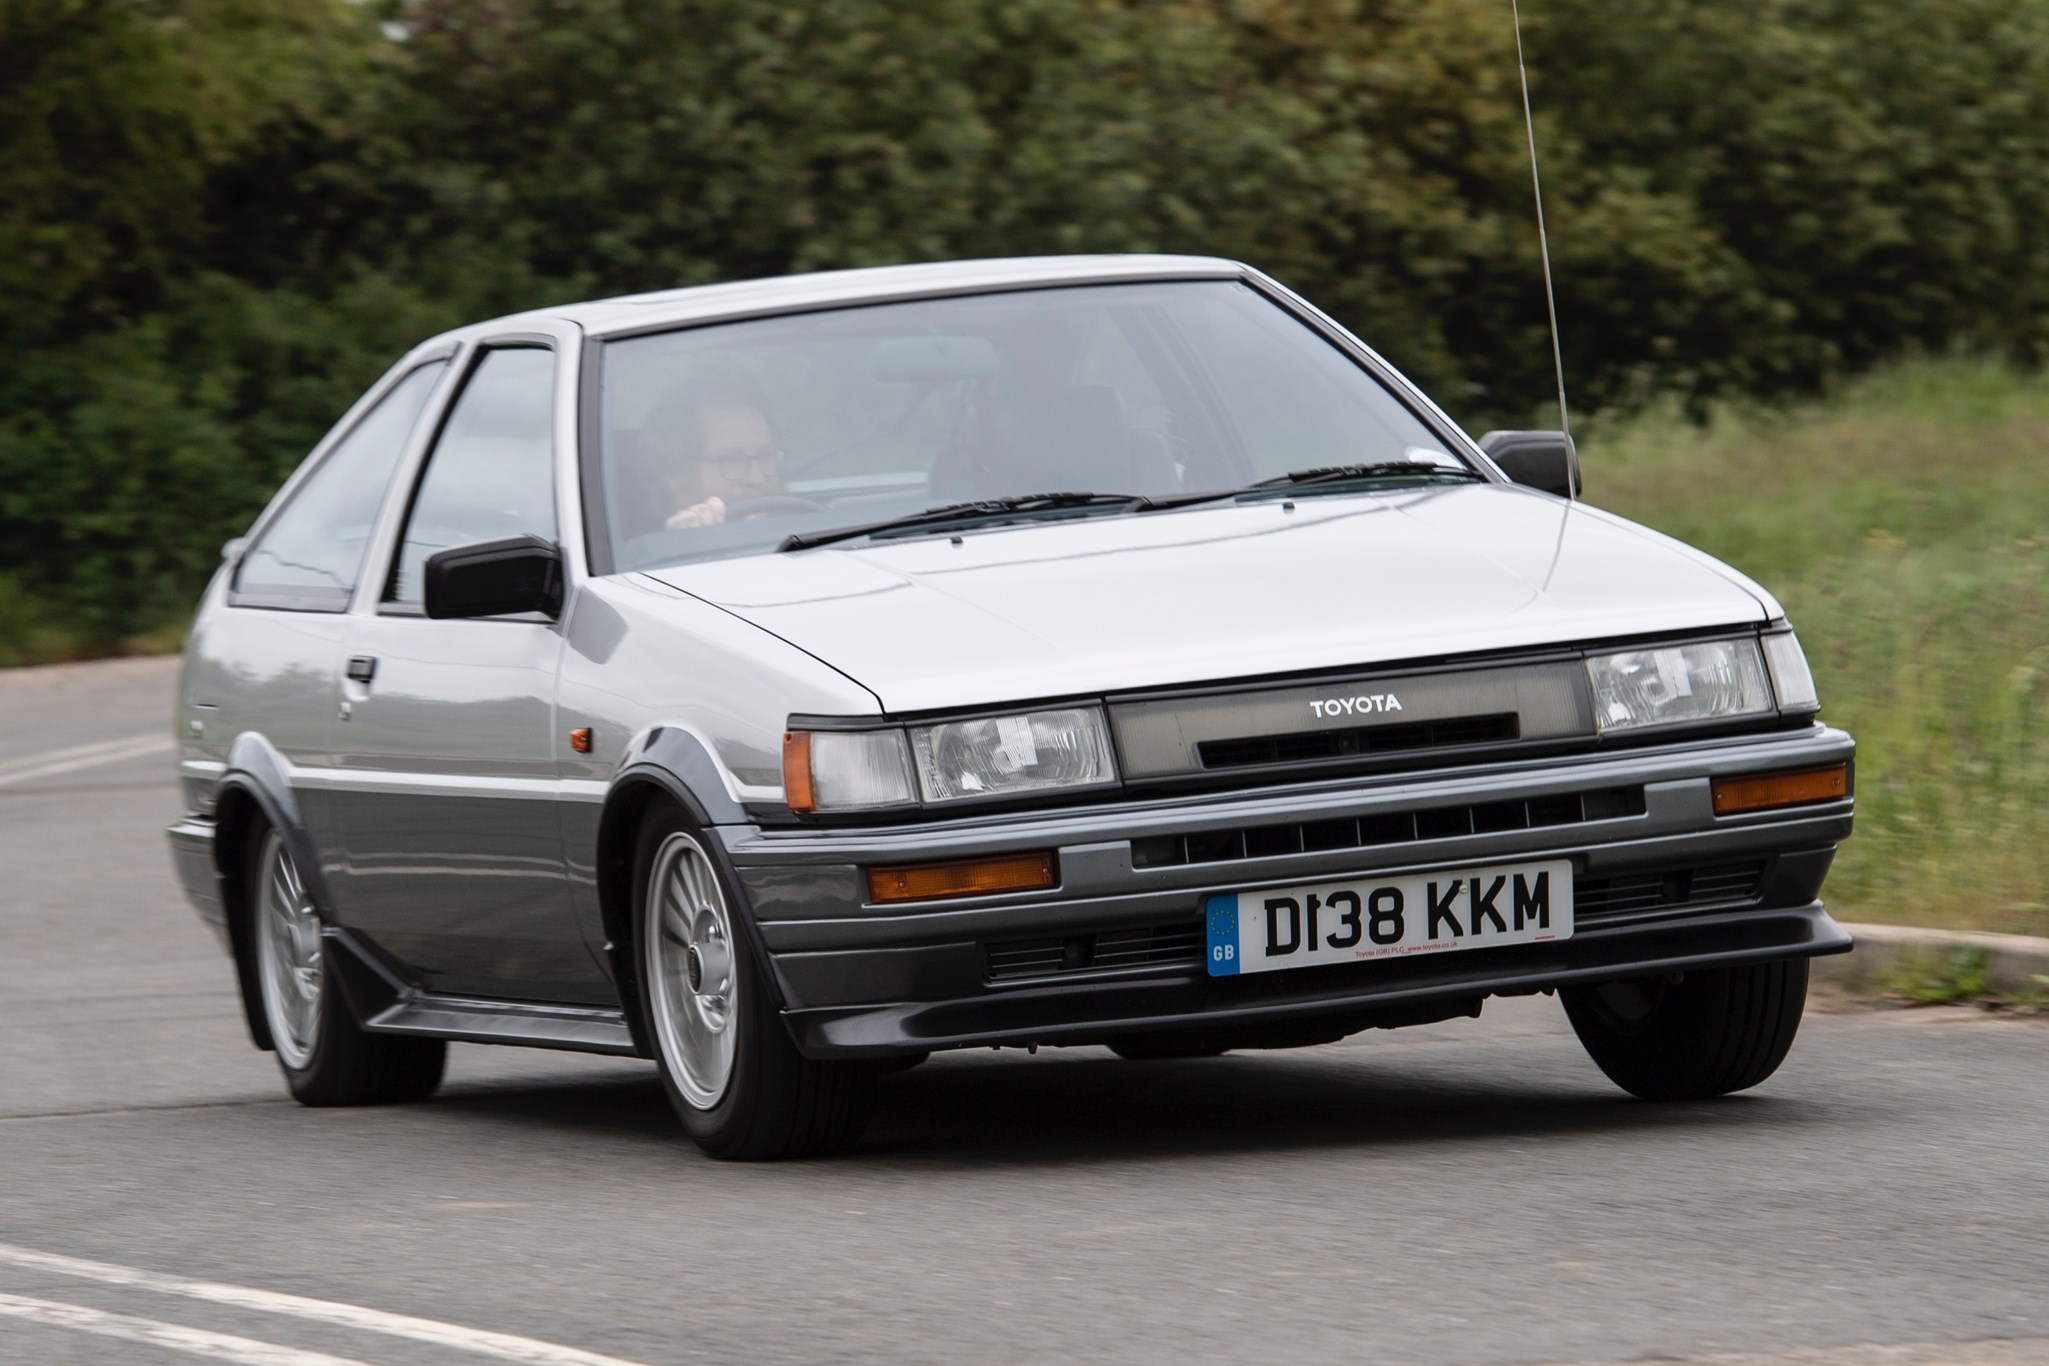 Driving the classics: AE86 Toyota Corolla GT review » Bussines ...